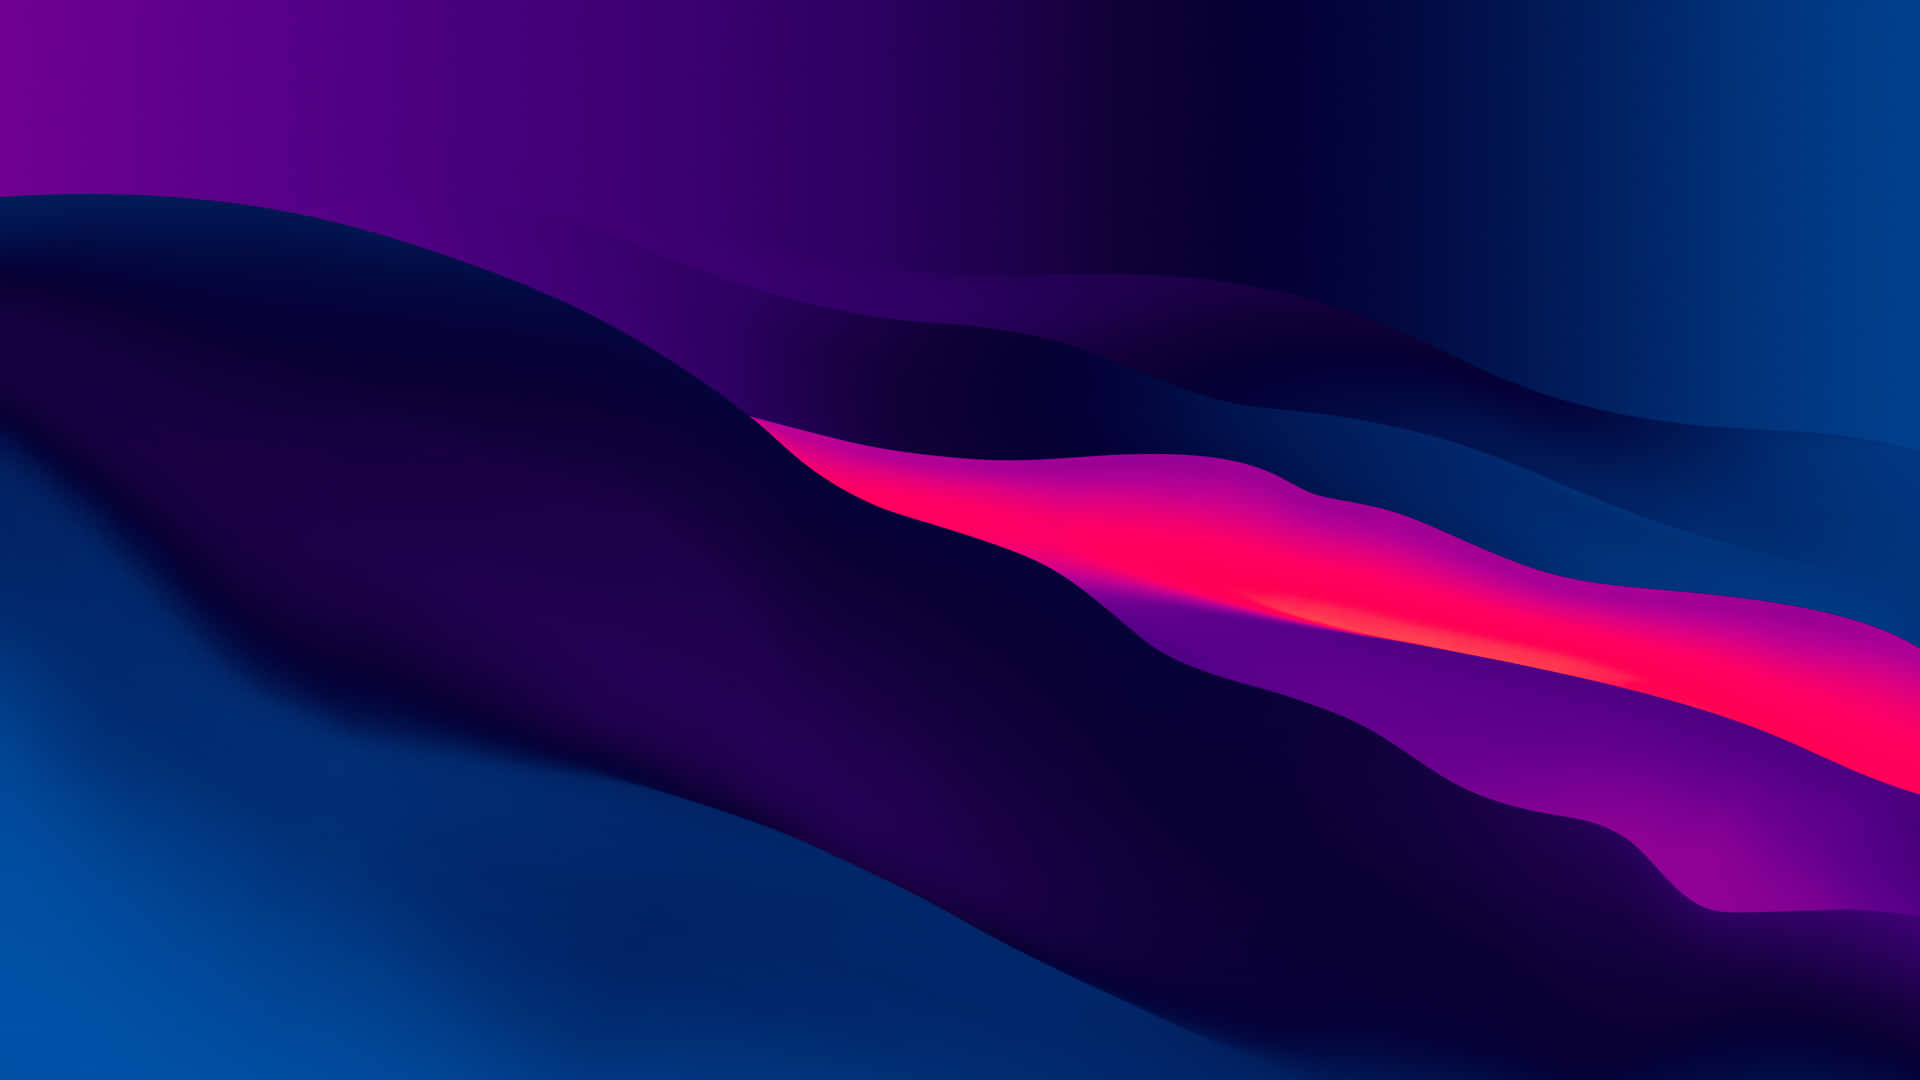 Vibrant Abstract Gradient Waves Wallpaper